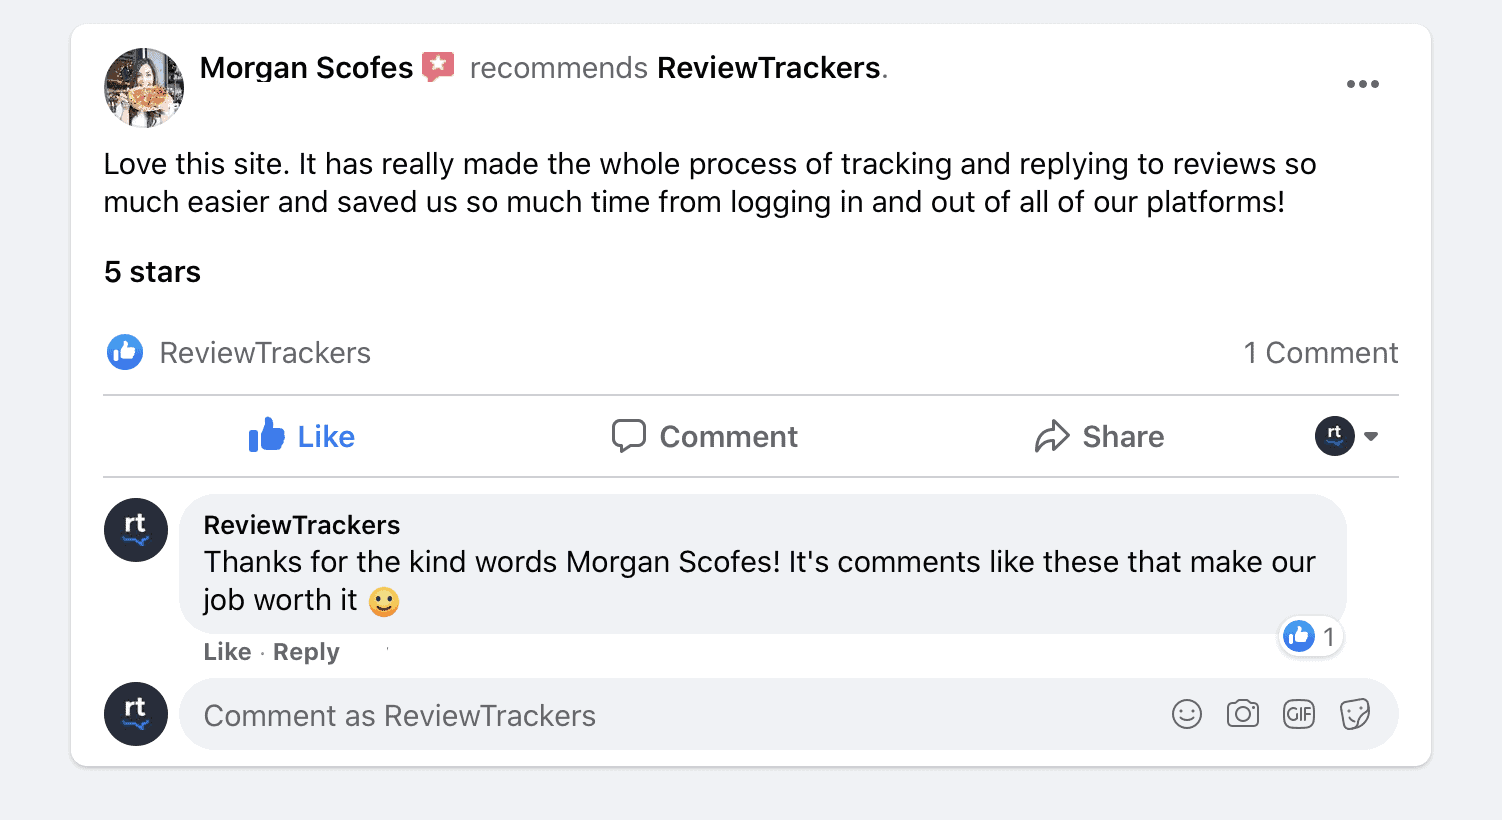 An example of a Recommendation on Facebook and the business Page's response